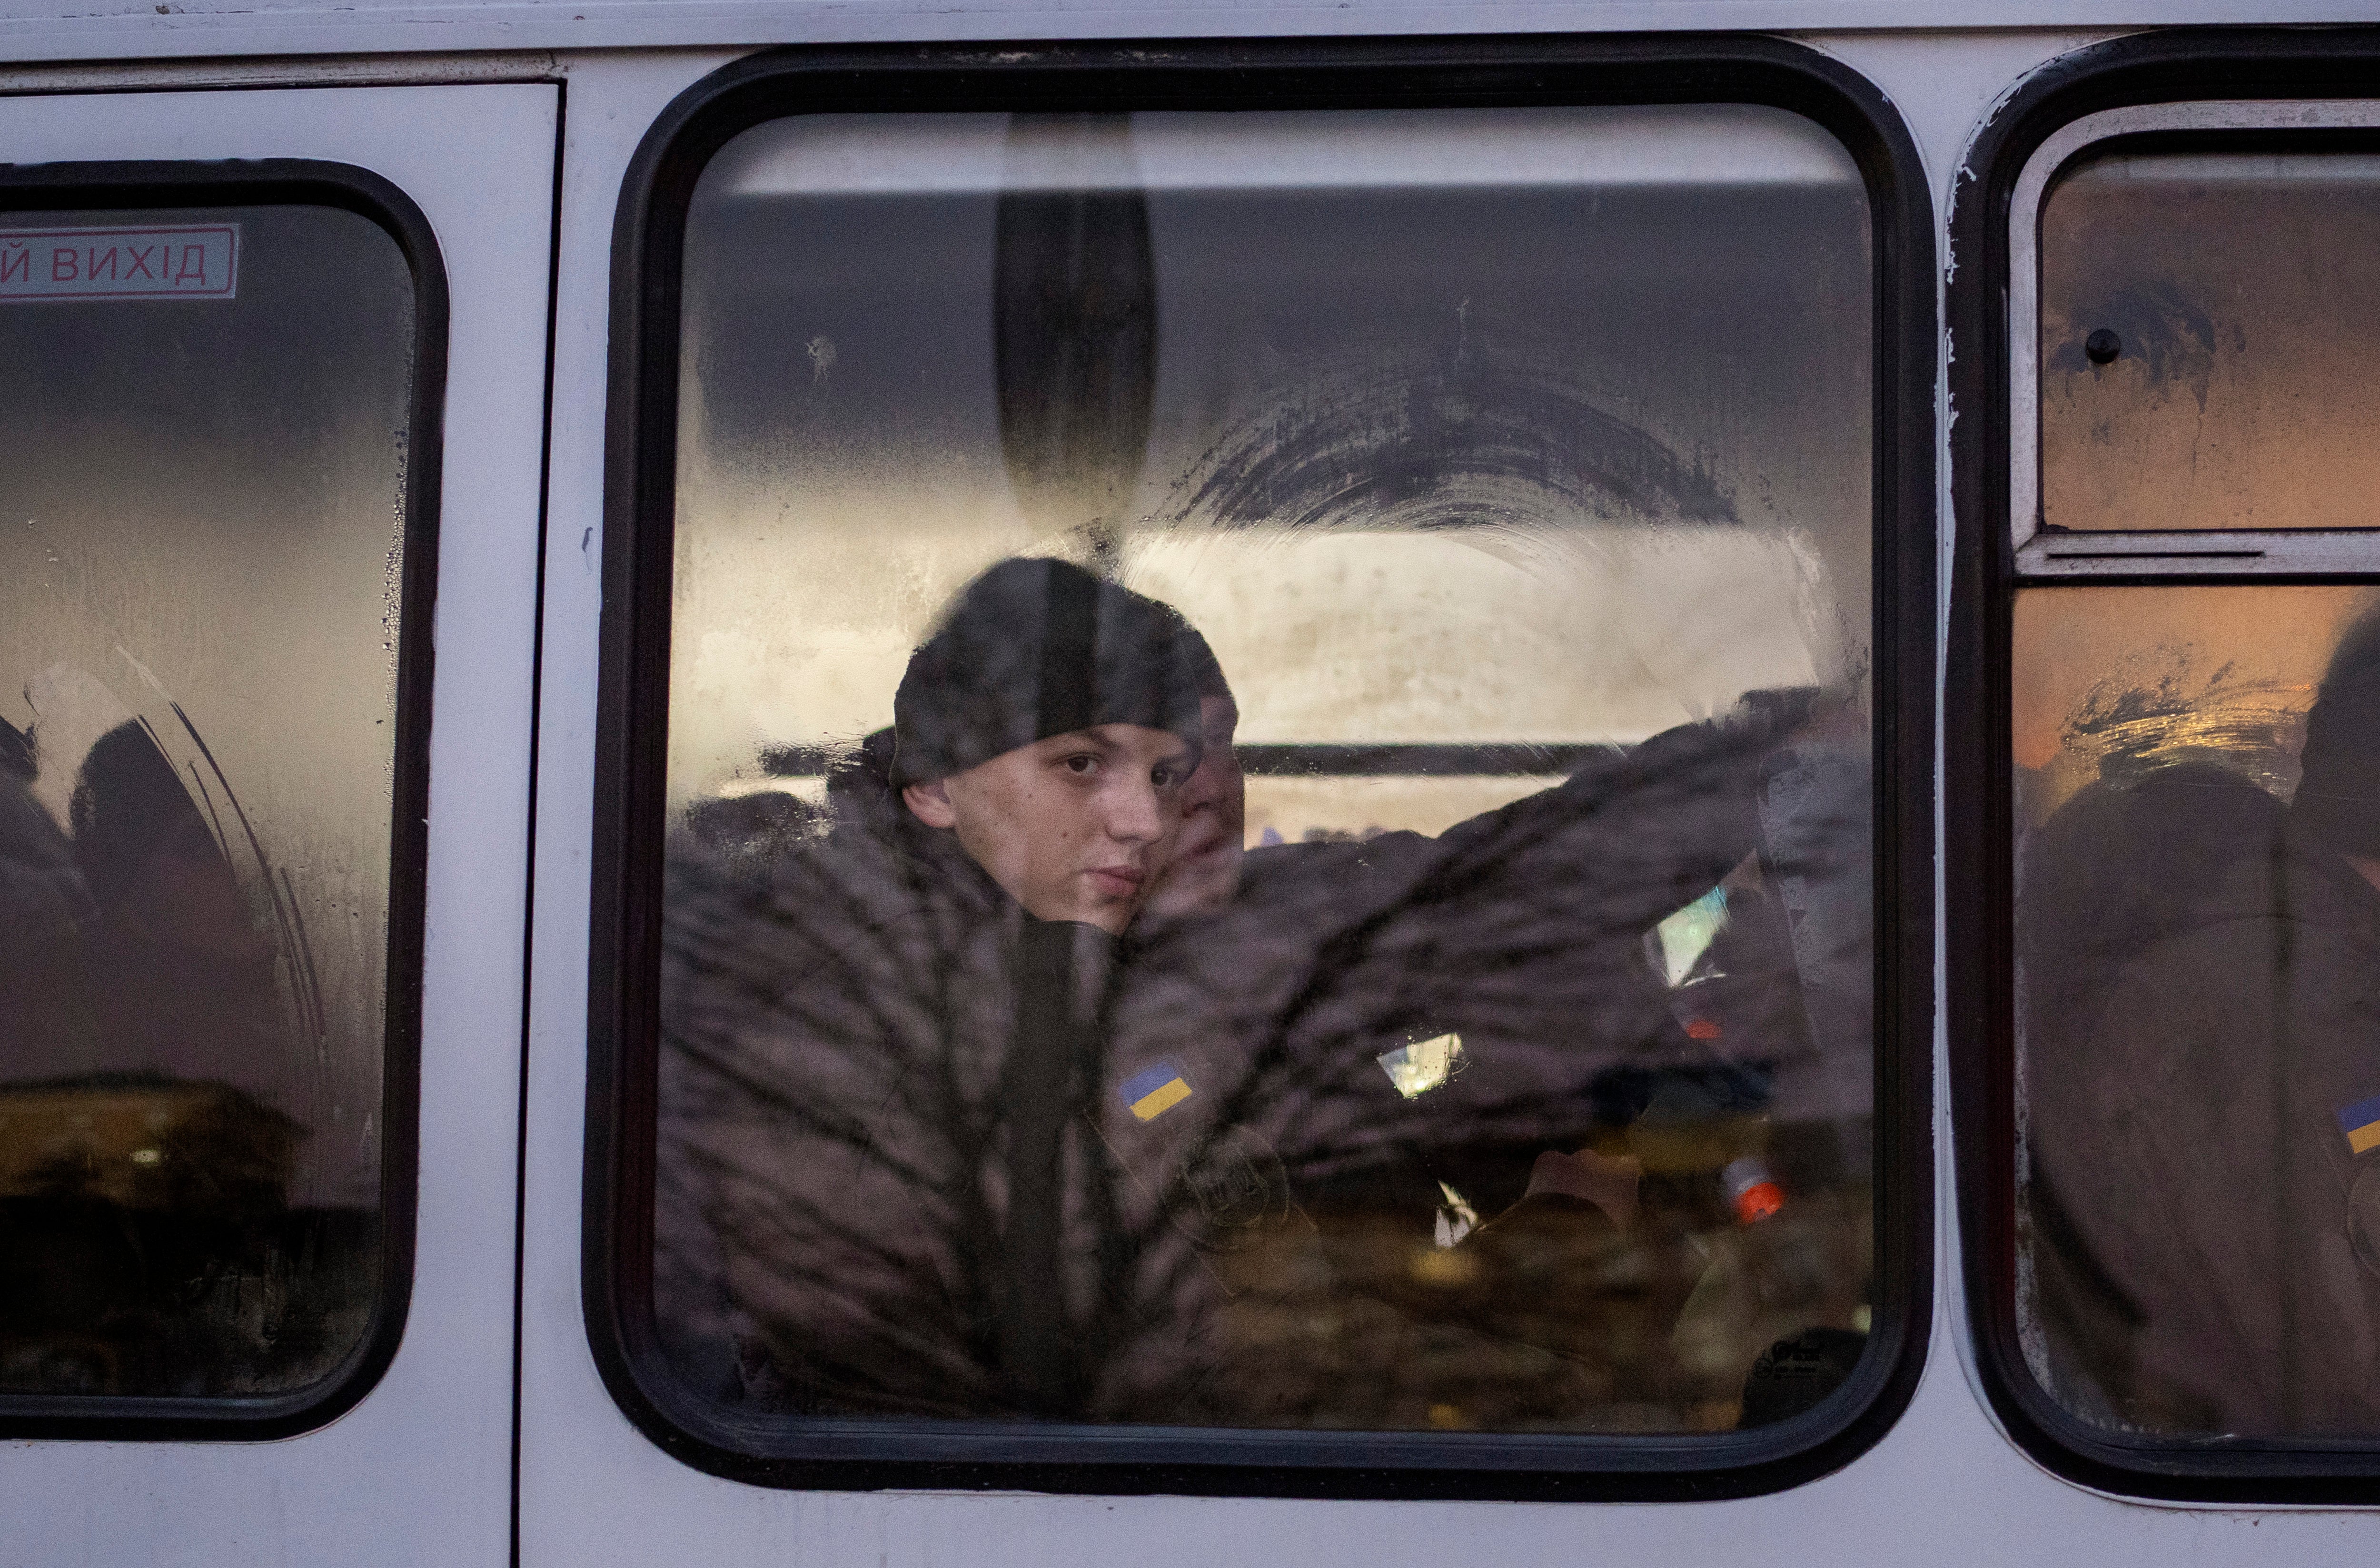 Members of National Guard of Ukraine look out of the window as they ride in a bus through the city of Kyiv (Emilio Morenatti/AP/Press Association Images)